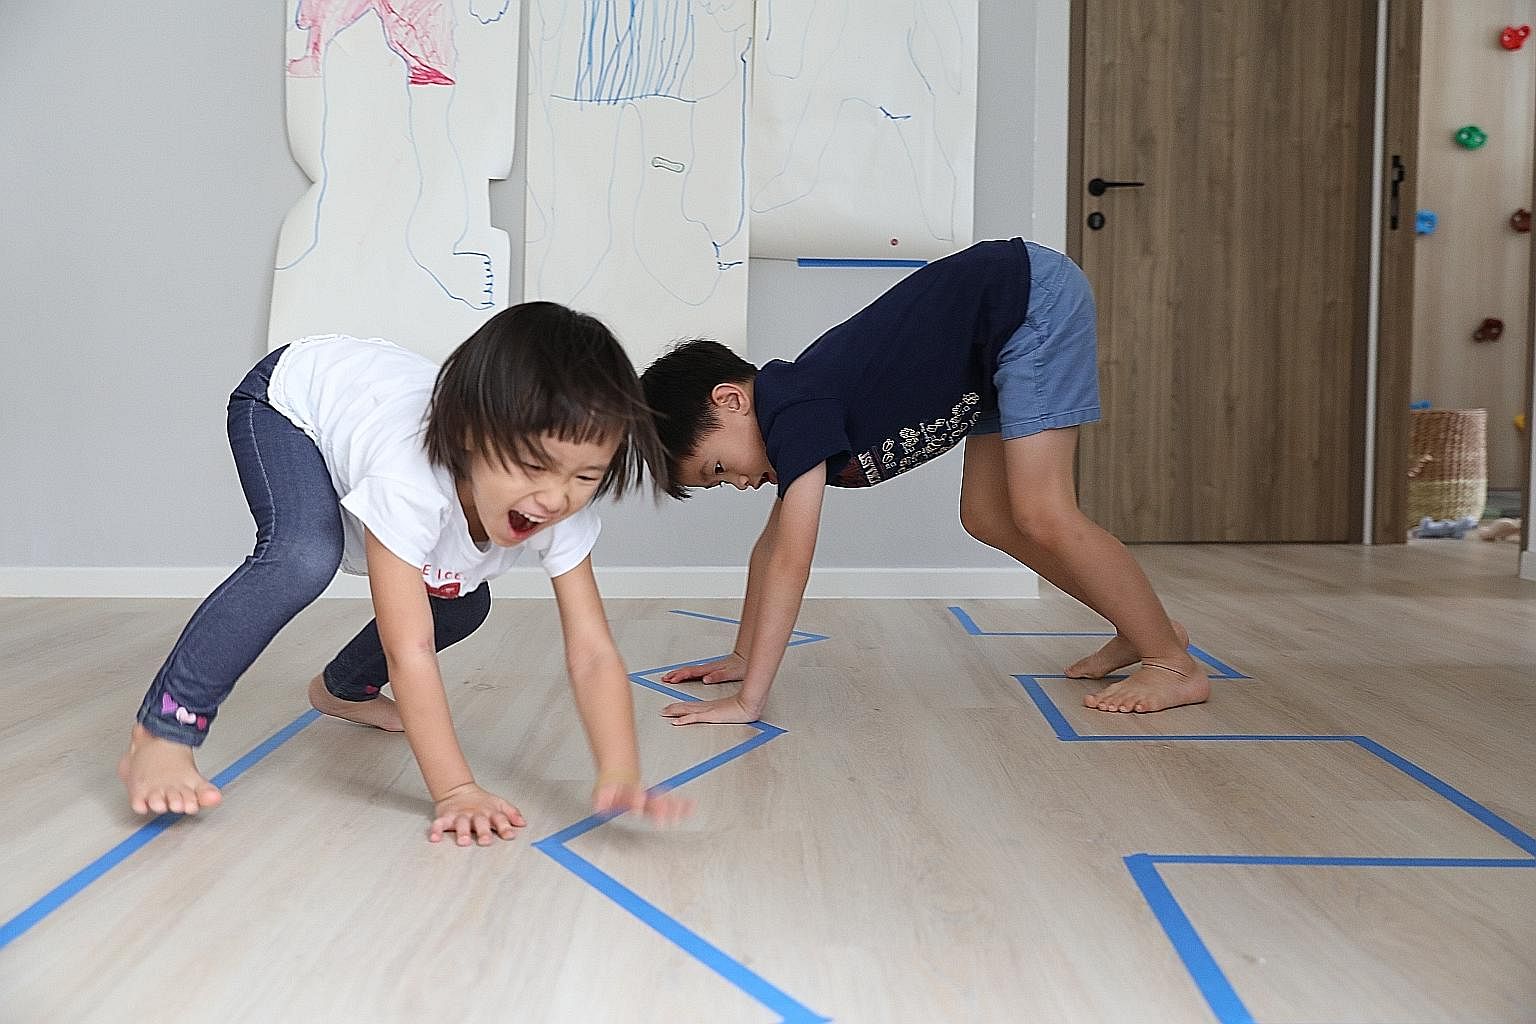 Parents can use items in the house to create activities for children, says Ms Fynn Sor, who runs an activity resource website called Happy Tot Shelf. Here, her children, Riley, four, and Zachary, seven, go through a line obstacle course where they tr